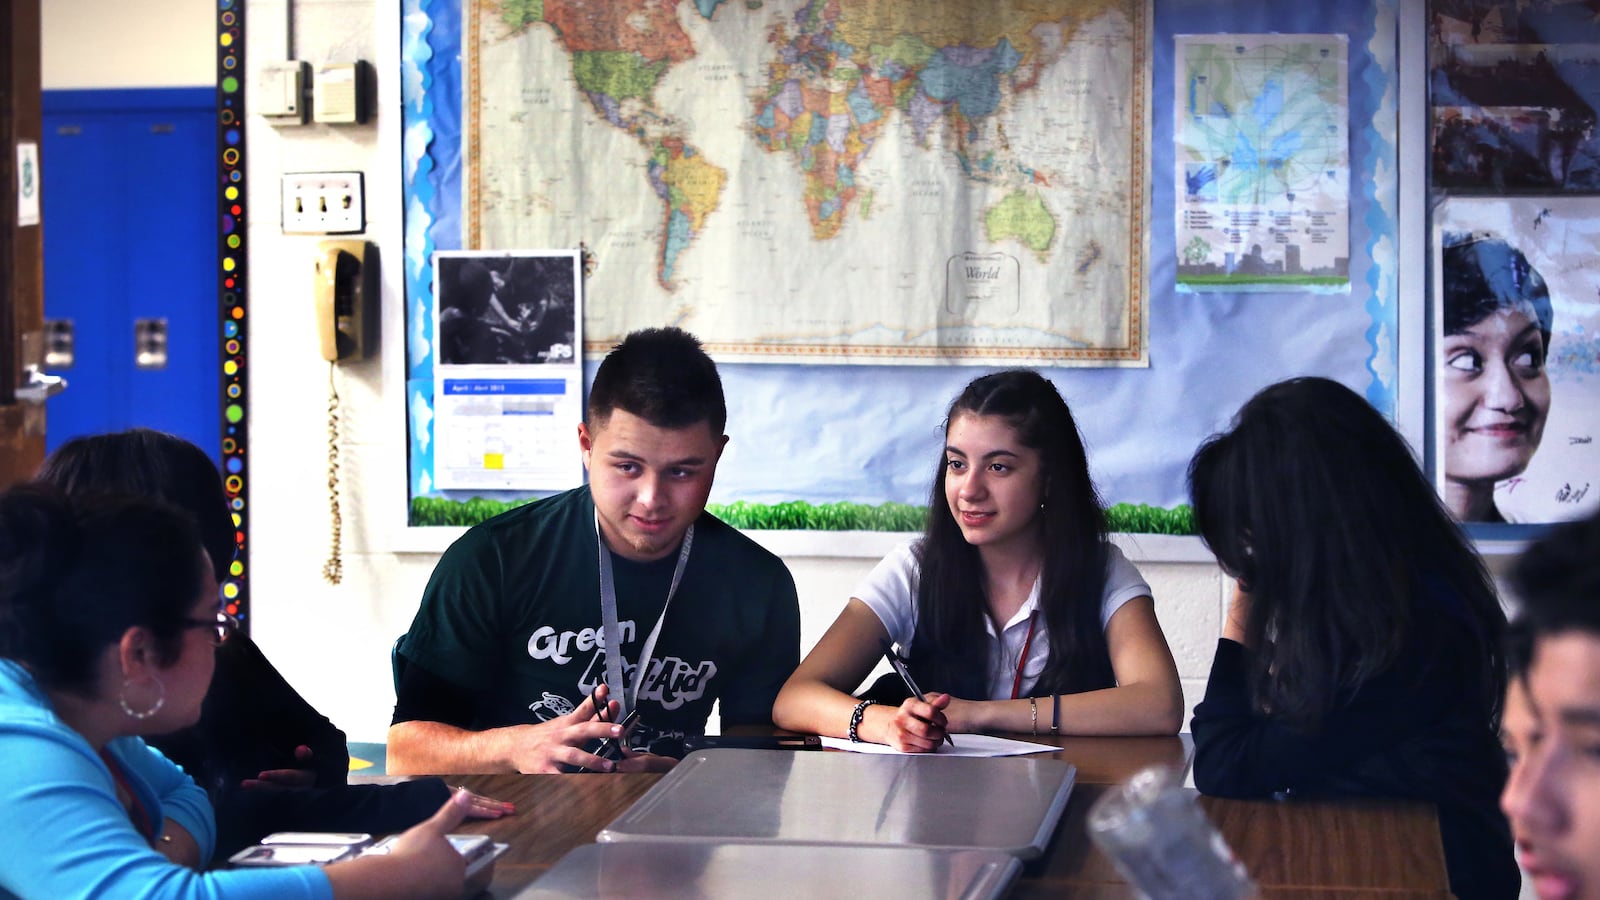 Cruz Tapia joins in a discussion among members of the United Northwest club about a documentary video on diversity during an after-school meeting at Northwest High School in Indianapolis. To his right is Maria Ulloa-Loza. Claudia Montes (left) is the college and career readiness adviser for English learners.